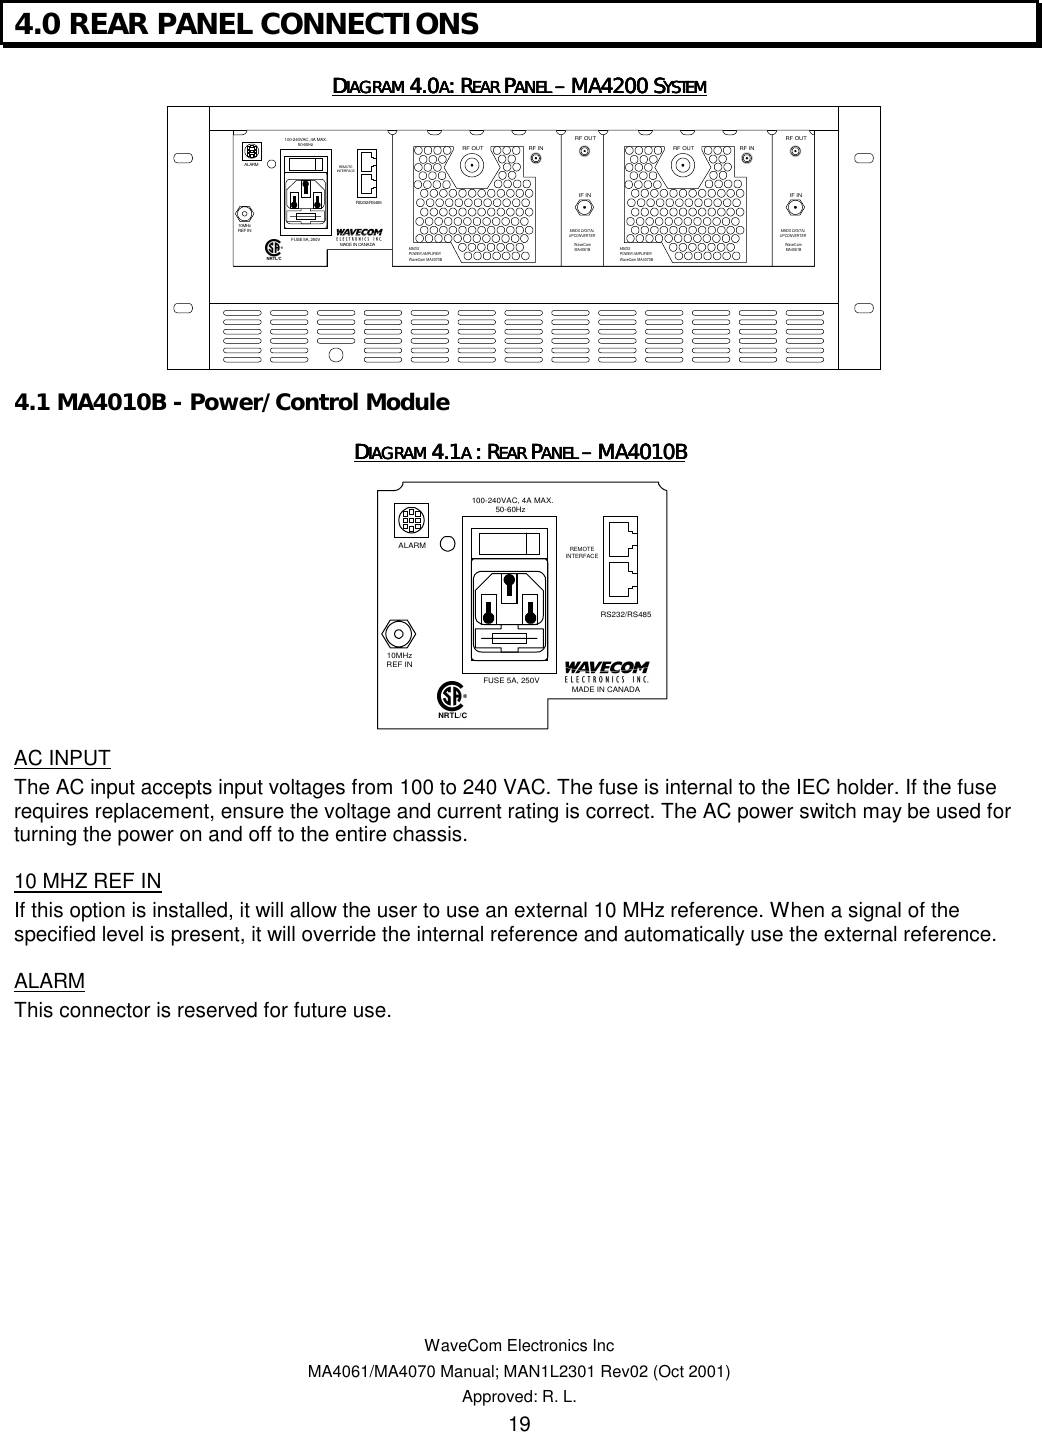   WaveCom Electronics Inc MA4061/MA4070 Manual; MAN1L2301 Rev02 (Oct 2001) Approved: R. L. 19 4.0 REAR PANEL CONNECTIONS DDDDIAGRAM IAGRAM IAGRAM IAGRAM 4.04.04.04.0AAAA: R: R: R: REAR EAR EAR EAR PPPPANEL ANEL ANEL ANEL –––– MA4200 S MA4200 S MA4200 S MA4200 SYSTEMYSTEMYSTEMYSTEM    4.1 MA4010B - Power/Control Module DDDDIAGRAM IAGRAM IAGRAM IAGRAM 4.14.14.14.1A A A A : R: R: R: REAR EAR EAR EAR PPPPANEL ANEL ANEL ANEL –––– MA4010B MA4010B MA4010B MA4010B    AC INPUT  The AC input accepts input voltages from 100 to 240 VAC. The fuse is internal to the IEC holder. If the fuse requires replacement, ensure the voltage and current rating is correct. The AC power switch may be used for turning the power on and off to the entire chassis. 10 MHZ REF IN If this option is installed, it will allow the user to use an external 10 MHz reference. When a signal of the specified level is present, it will override the internal reference and automatically use the external reference. ALARM This connector is reserved for future use.  REMOTEINTERFACEMADE IN CANADA100-240VAC, 4A MAX.50-60HzFUSE 5A, 250VALARM10MHzREF INRS232/RS485NRTL/CRF OUTIF INMMDS DIGITALUPCONVERTERWaveComMA4061BRF OUTIF INMMDS DIGITALUPCONVERTERWaveComMA4061BRF OUT RF INMMDSPOWER AMPLIFIERWaveCom MA4070BRF OUT RF INMMDSPOWER AMPLIFIERWaveCom MA4070BREMOTEINTERFACEMADE IN CANADA100-240VAC, 4A MAX.50-60HzFUSE 5A, 250VALARM10MHzREF INRS232/RS485NRTL/C